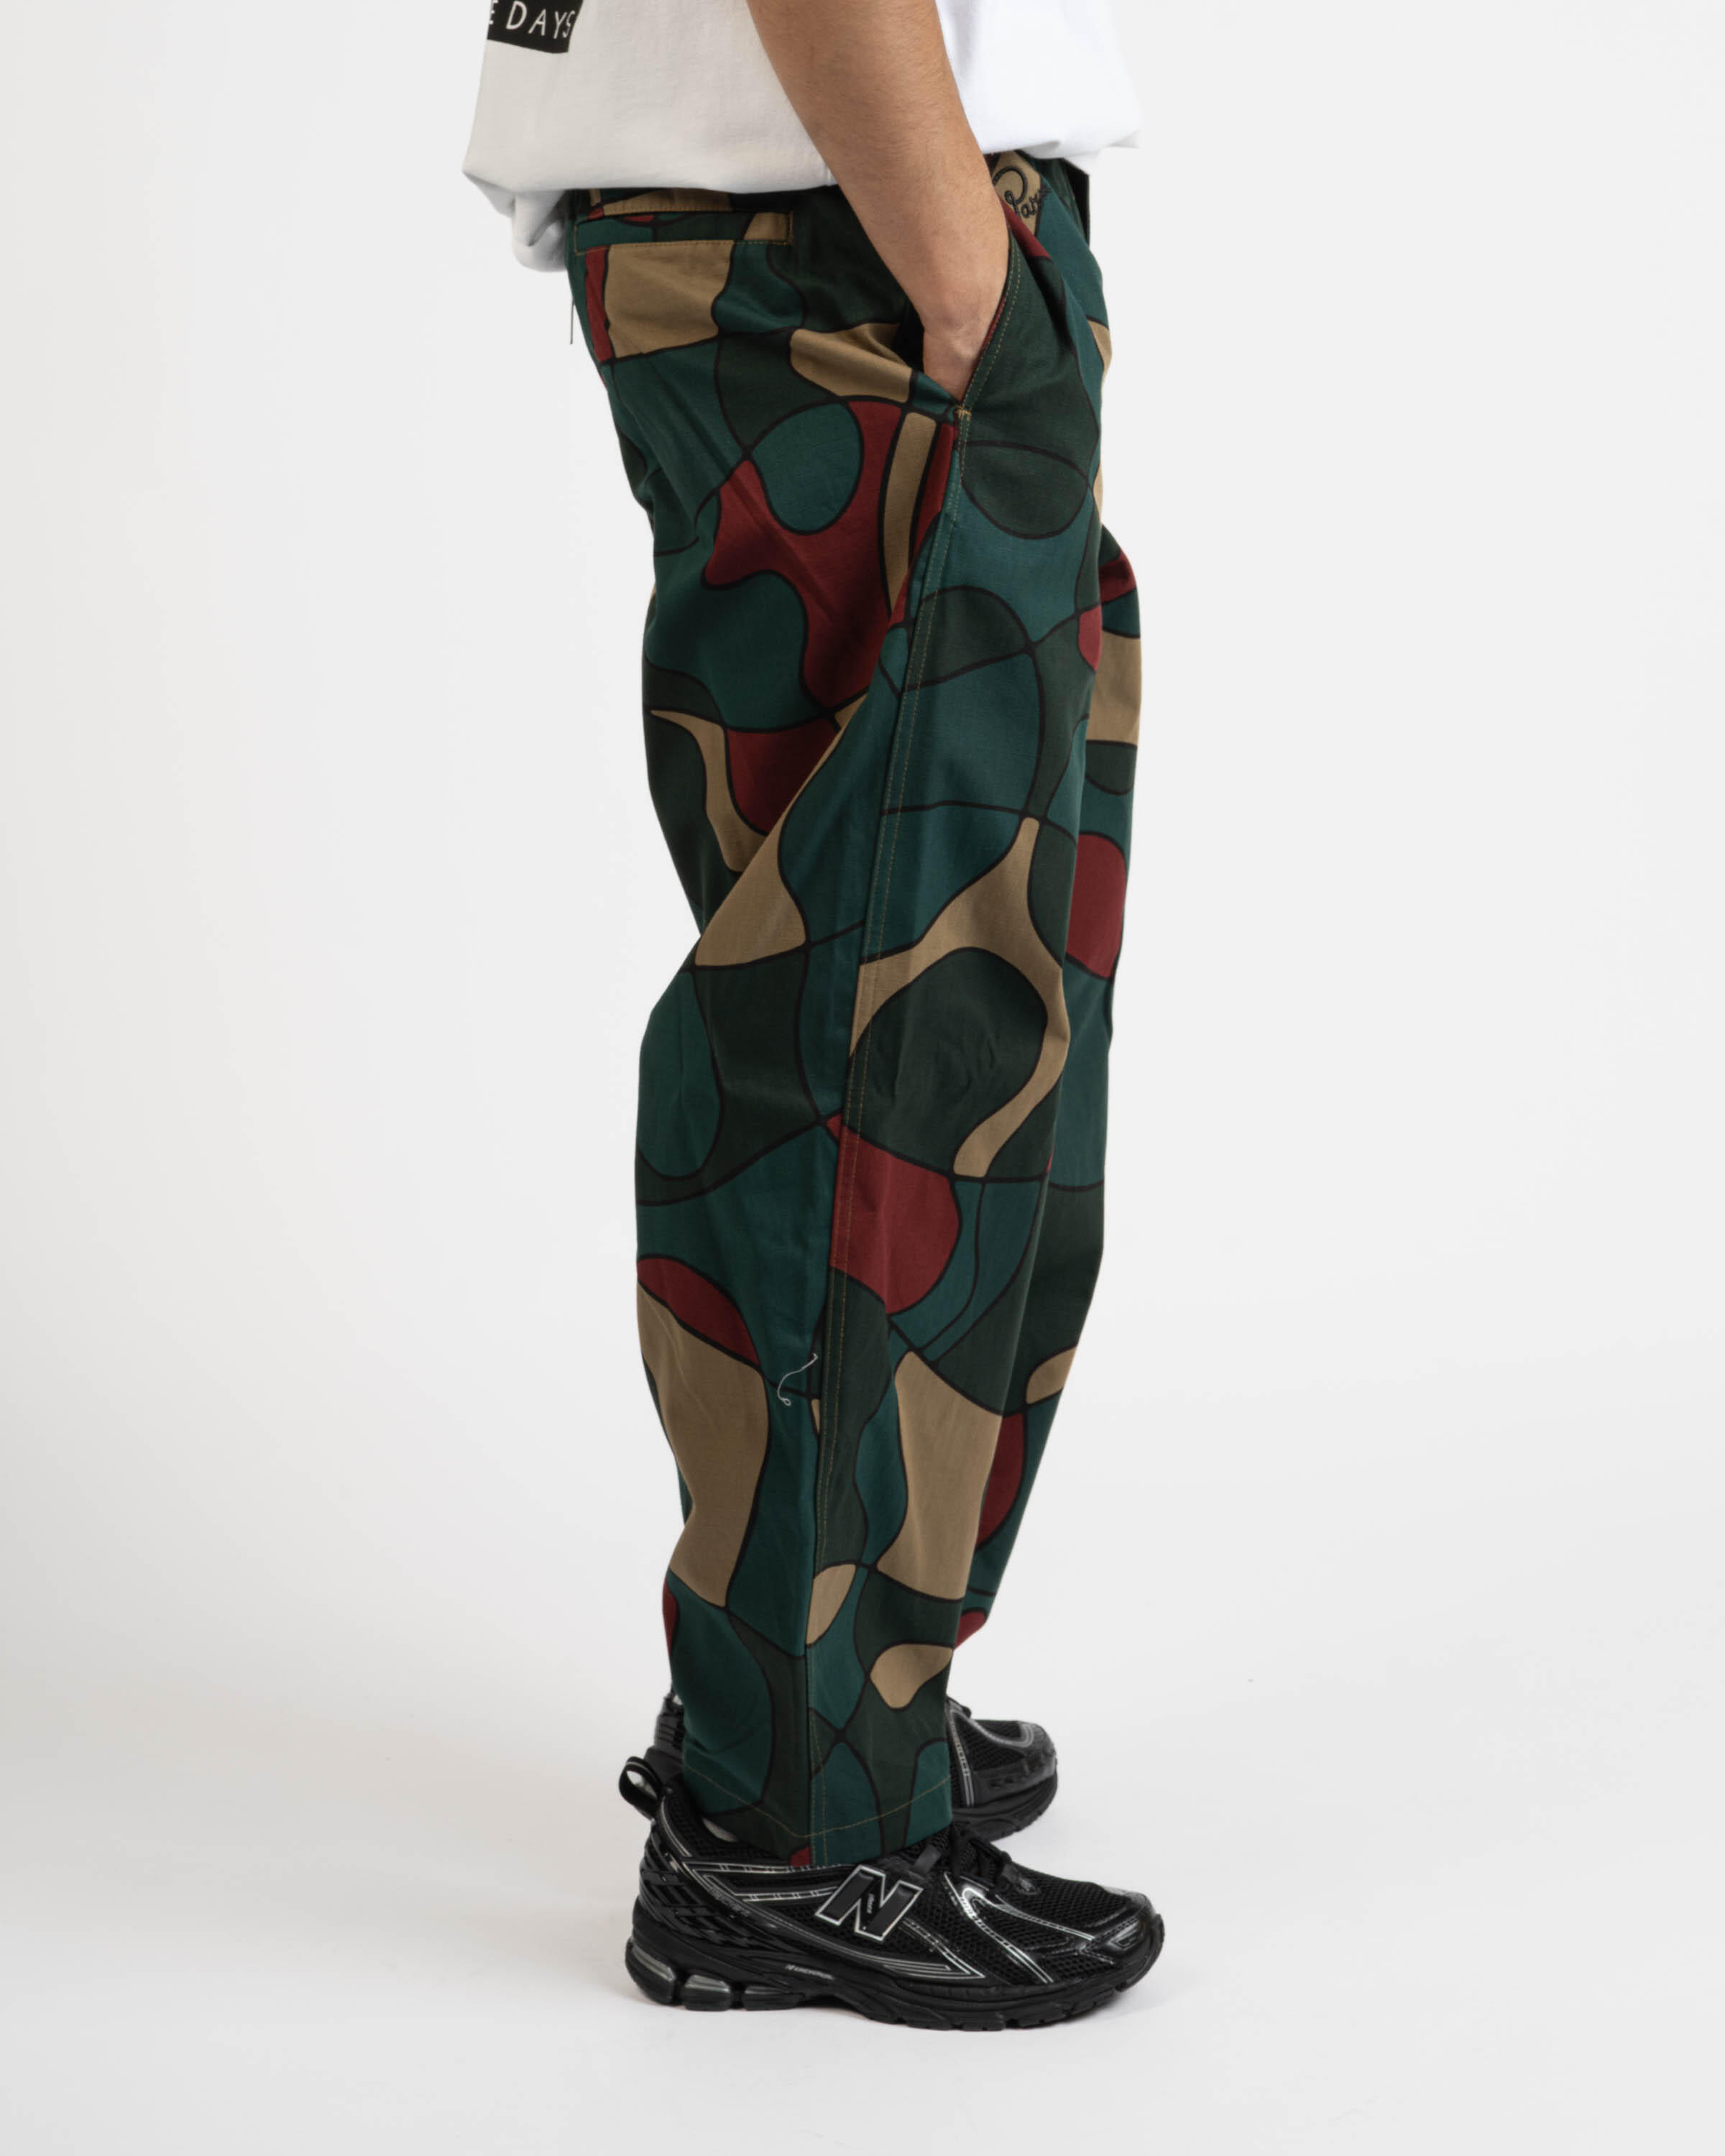 by Parra trees in wind relaxed pants